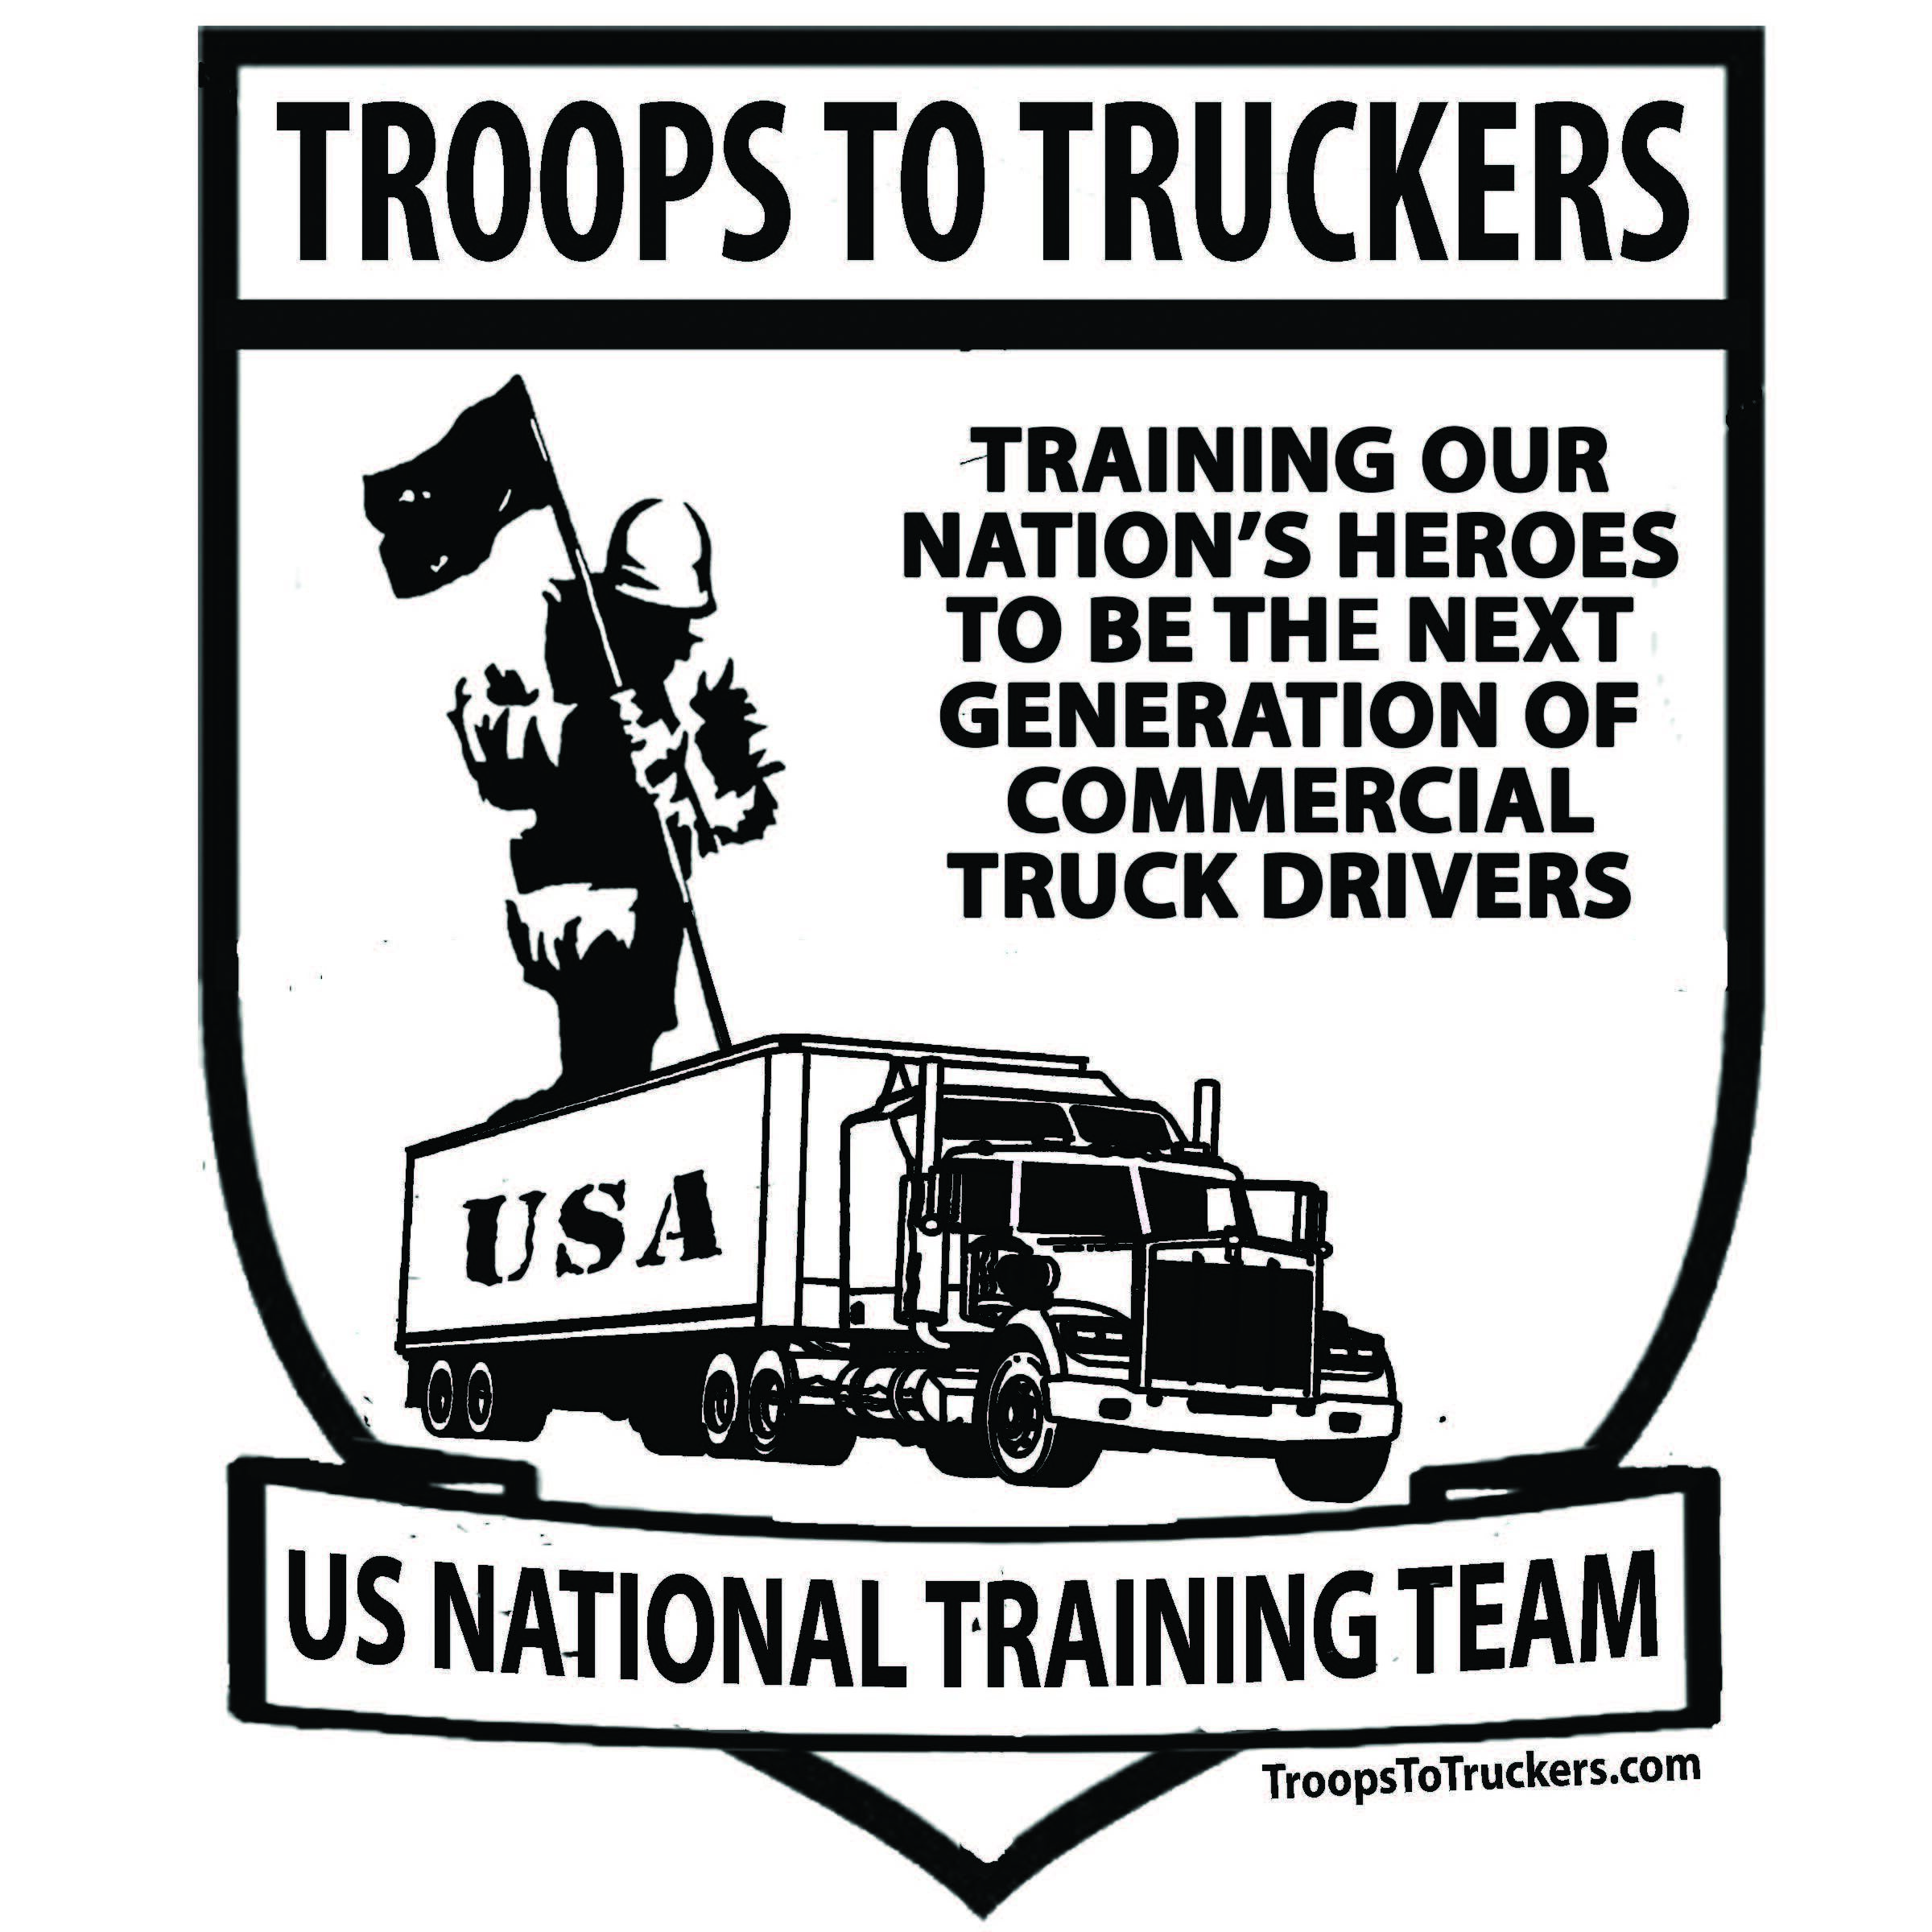 Troops to Truckers